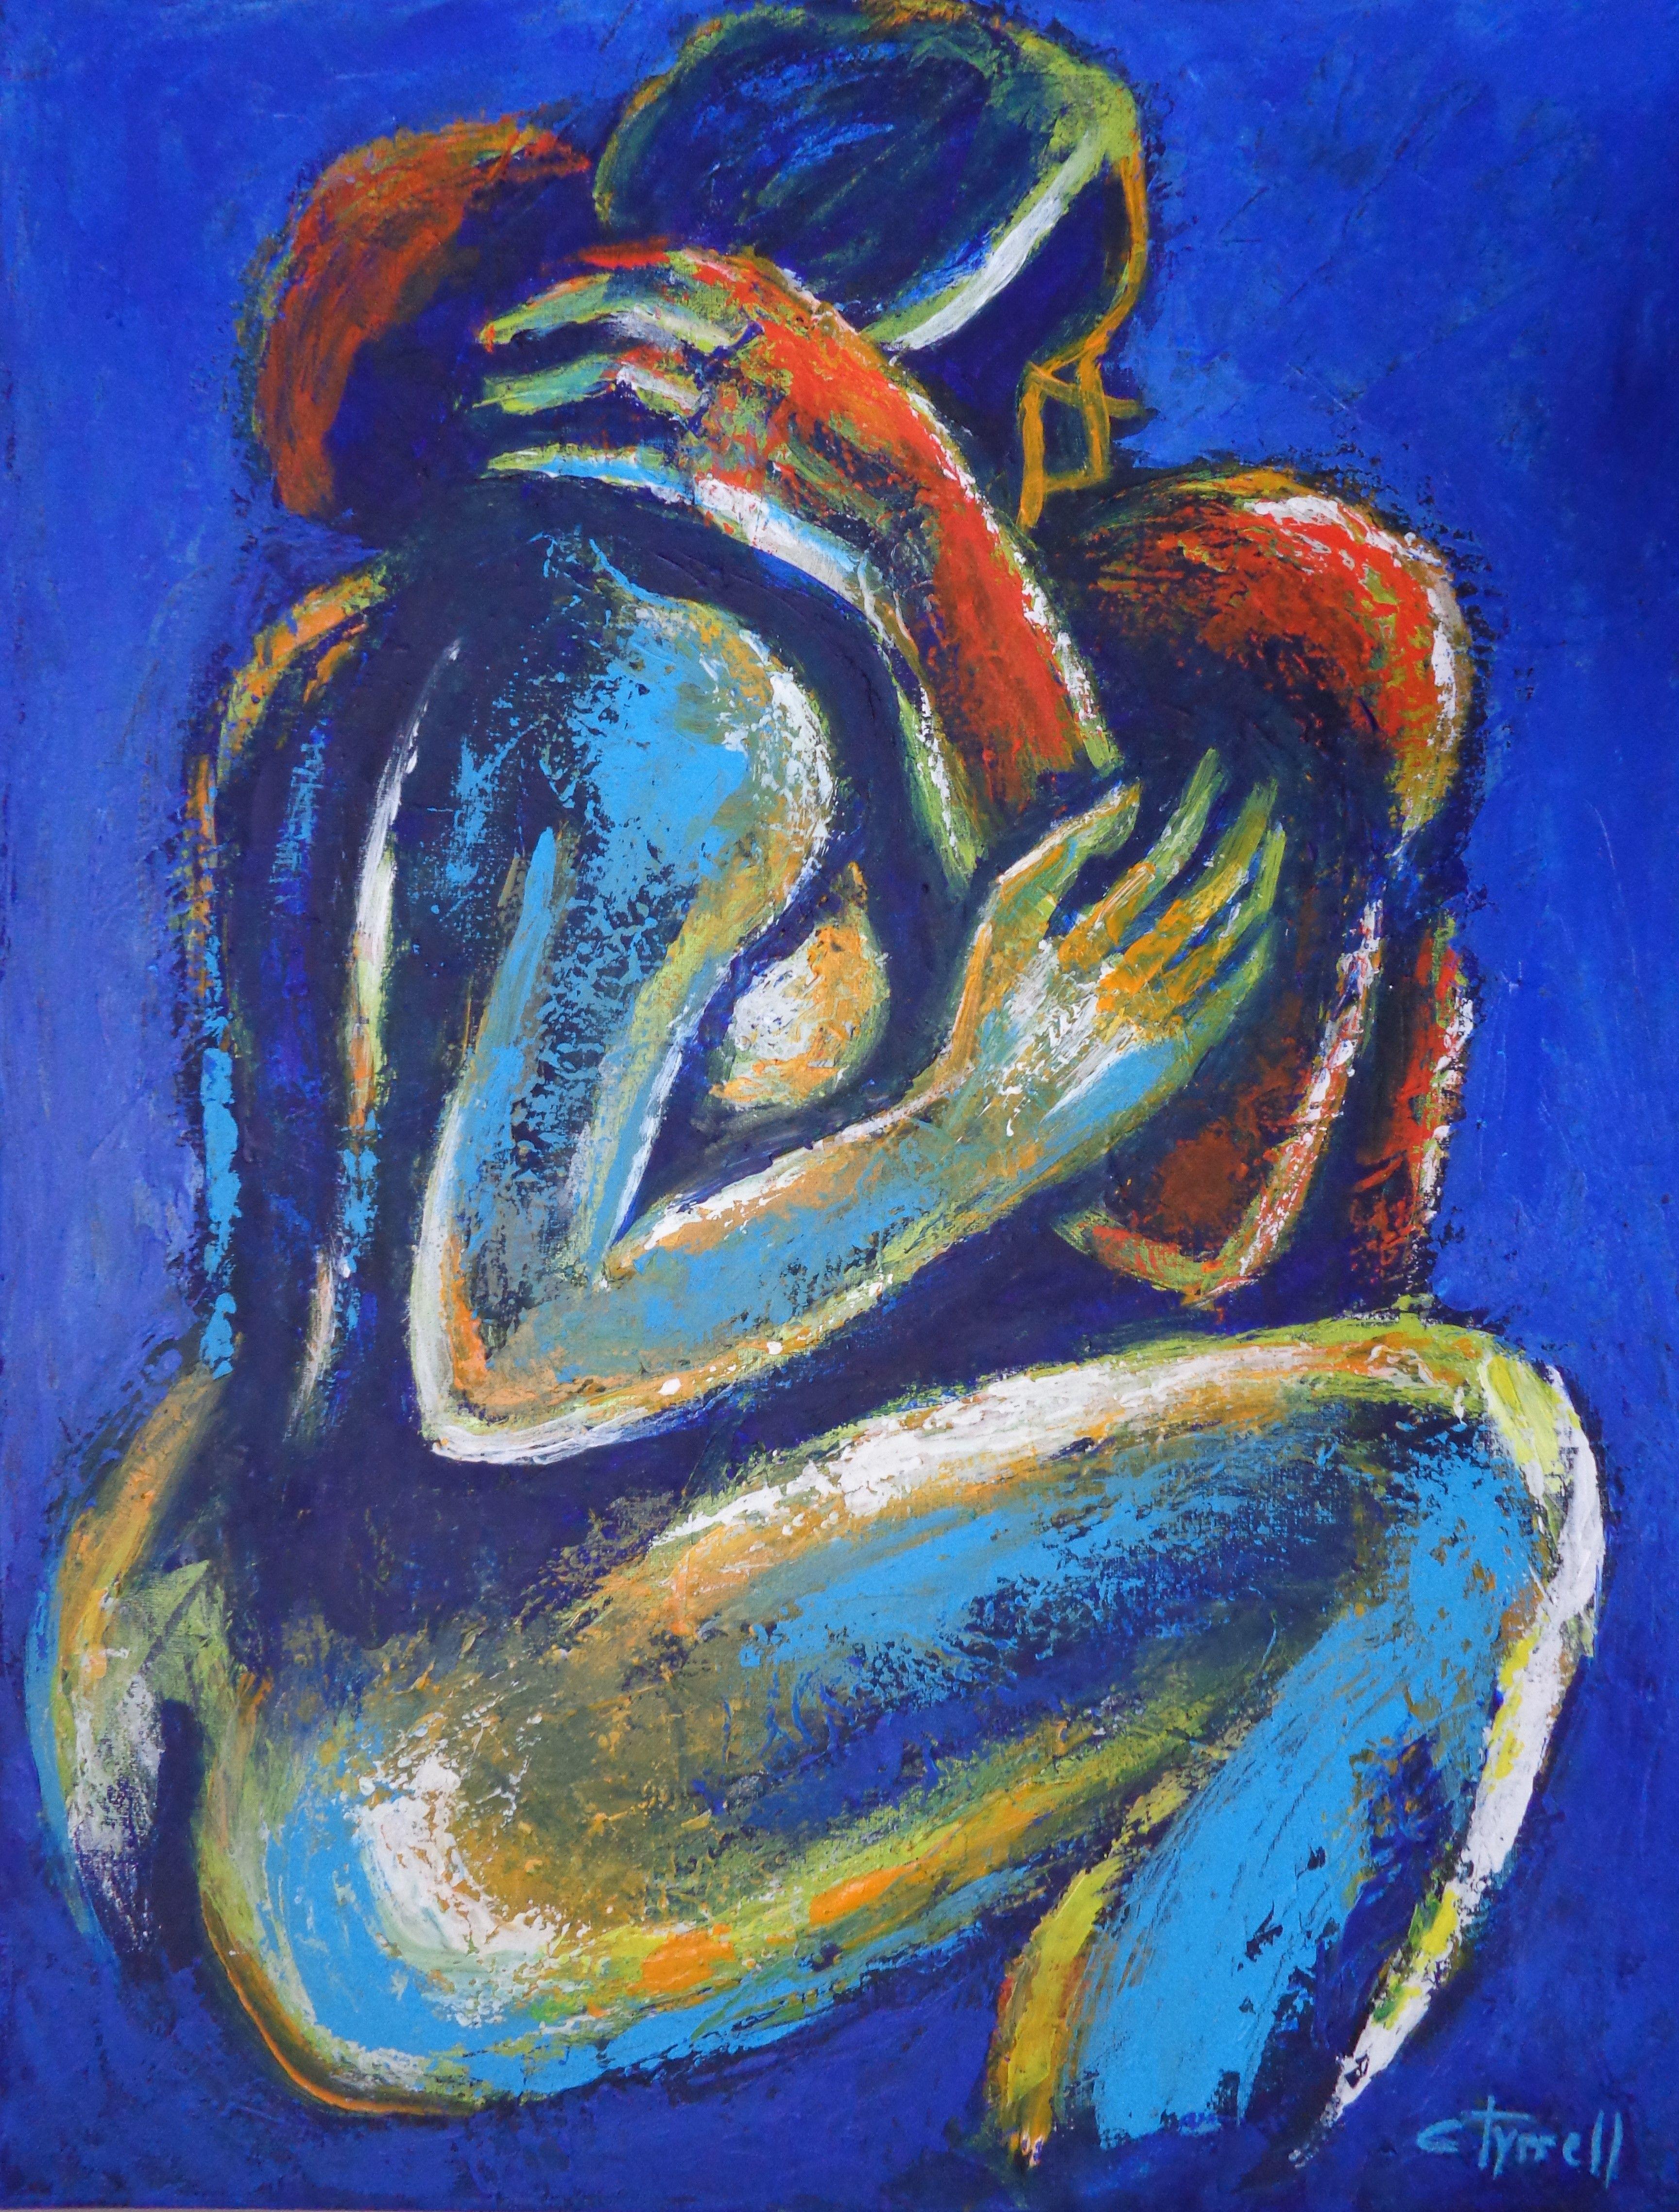 Original semi-abstract figurative acrylics painting on canvas, painted edges and ready to hang. Colourful and textured produced using the palette knife. The 9th artwork in the series "Night of Passion". Emotional image of embraced couple in love.